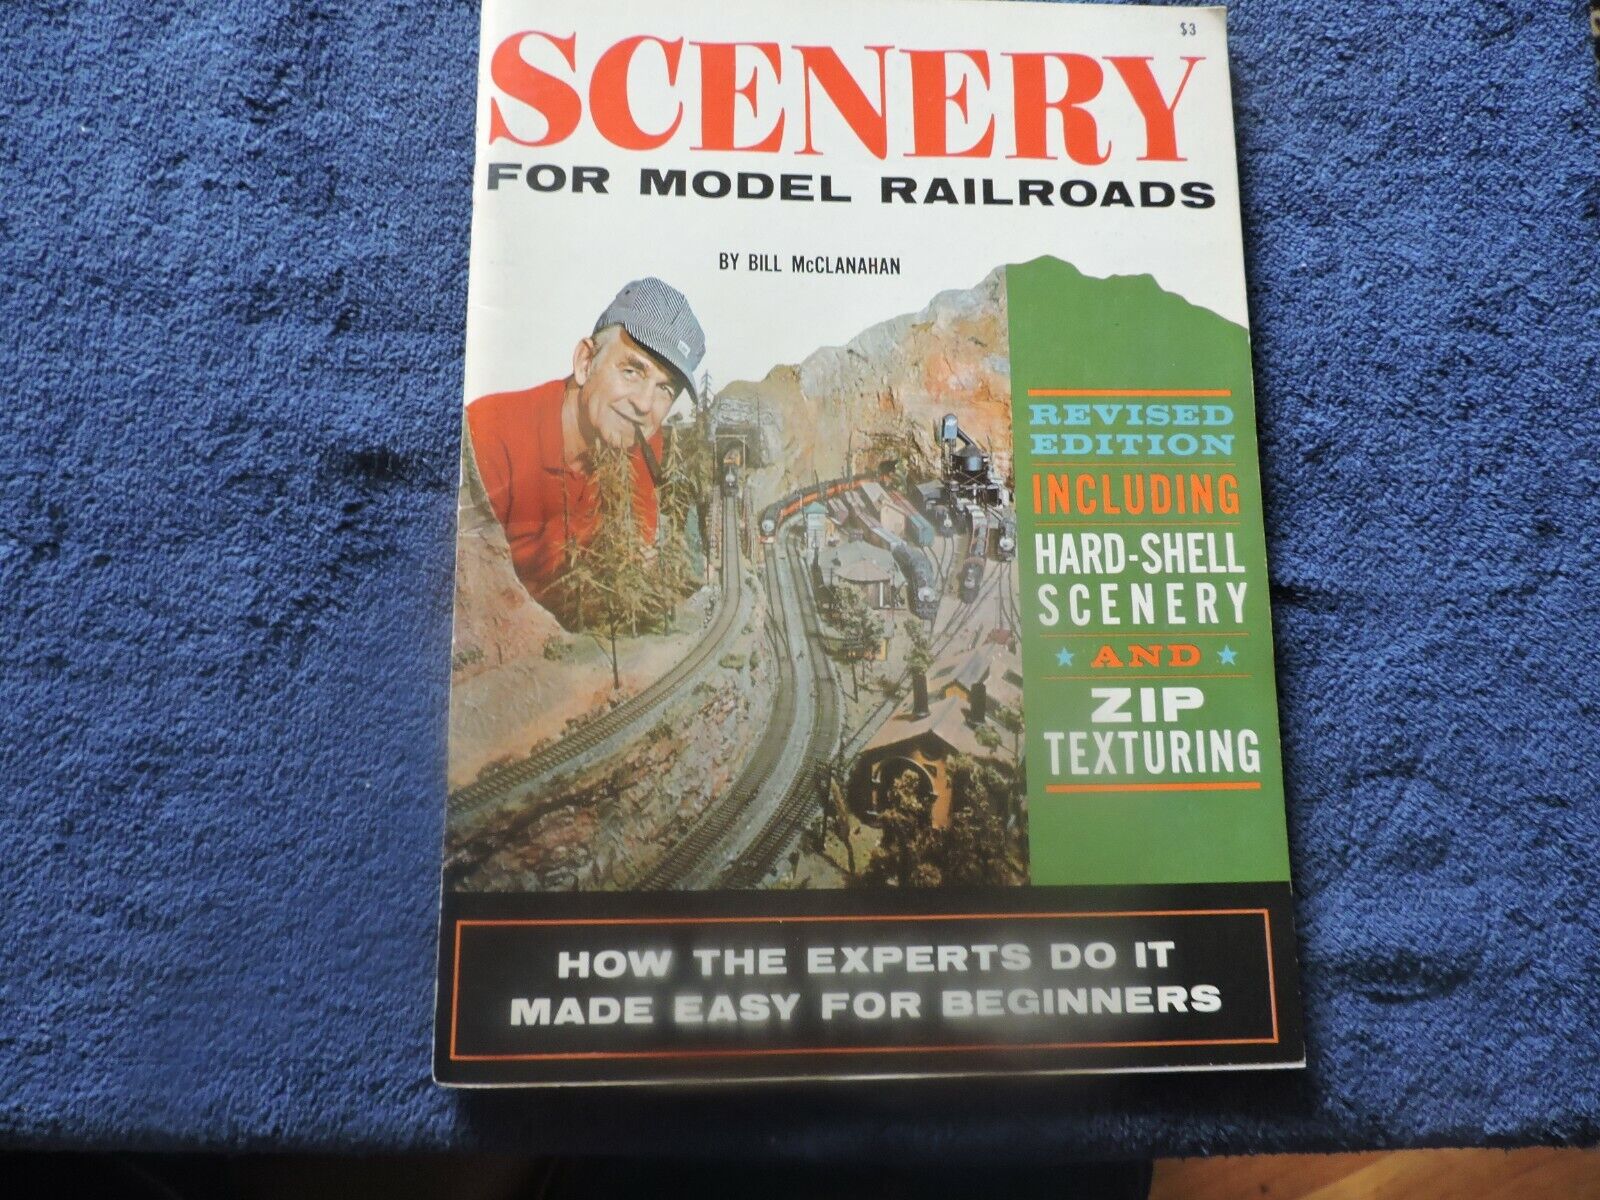 SCENERY FOR MODEL RAILROADS BY BILL MCCLANAHAN